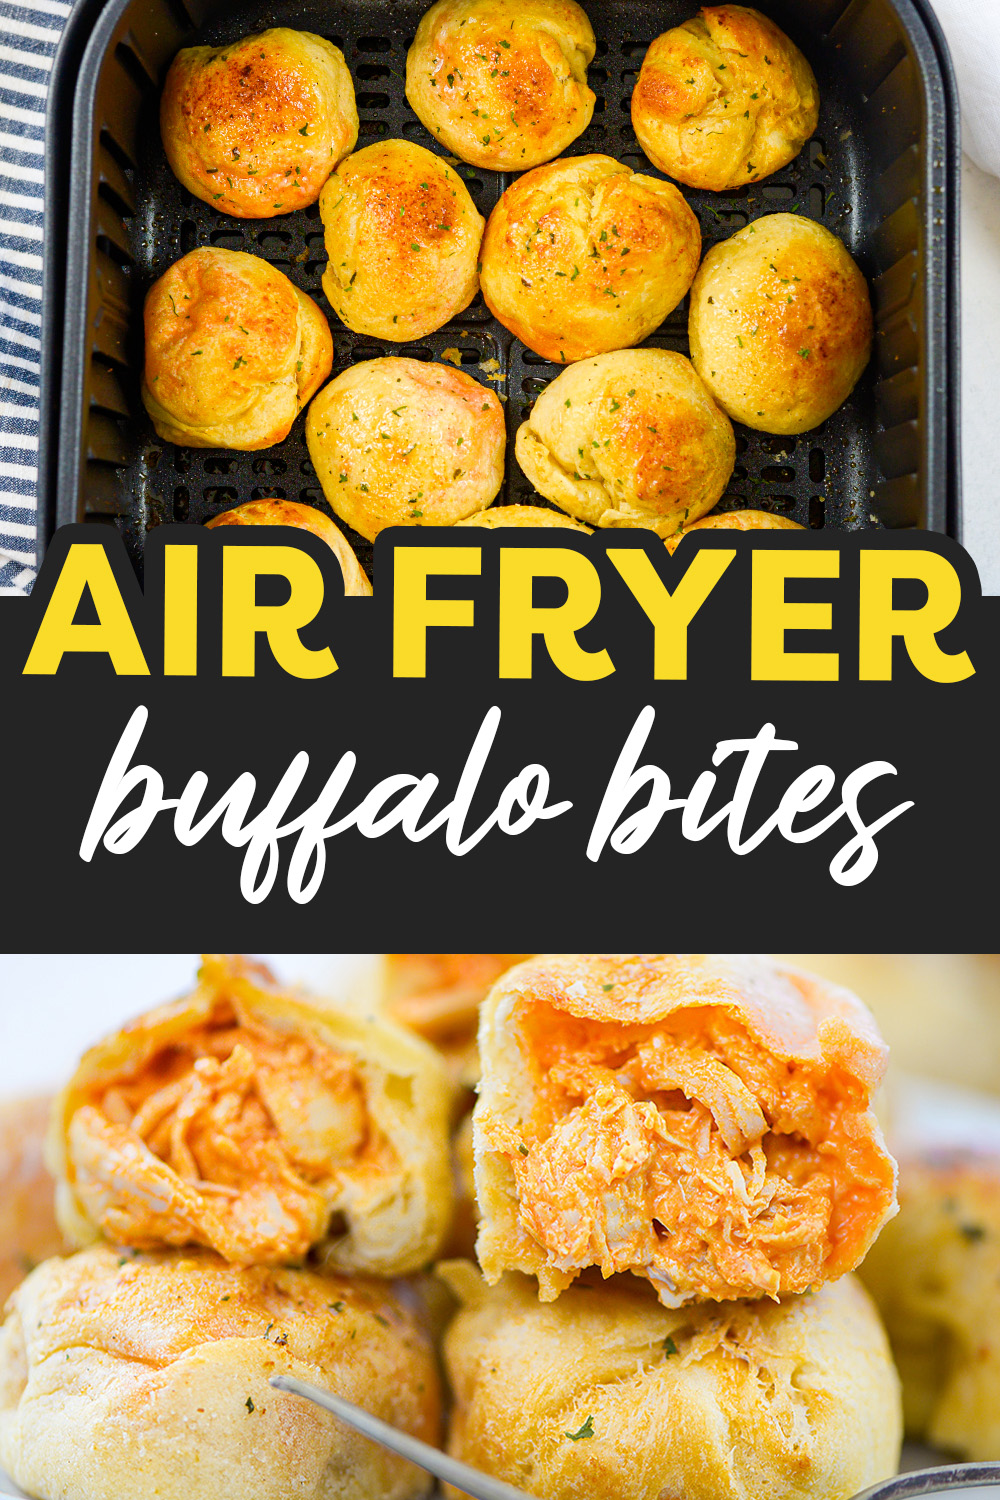 These buffalo chicken bites are simple snacks that you make in your air fryer!